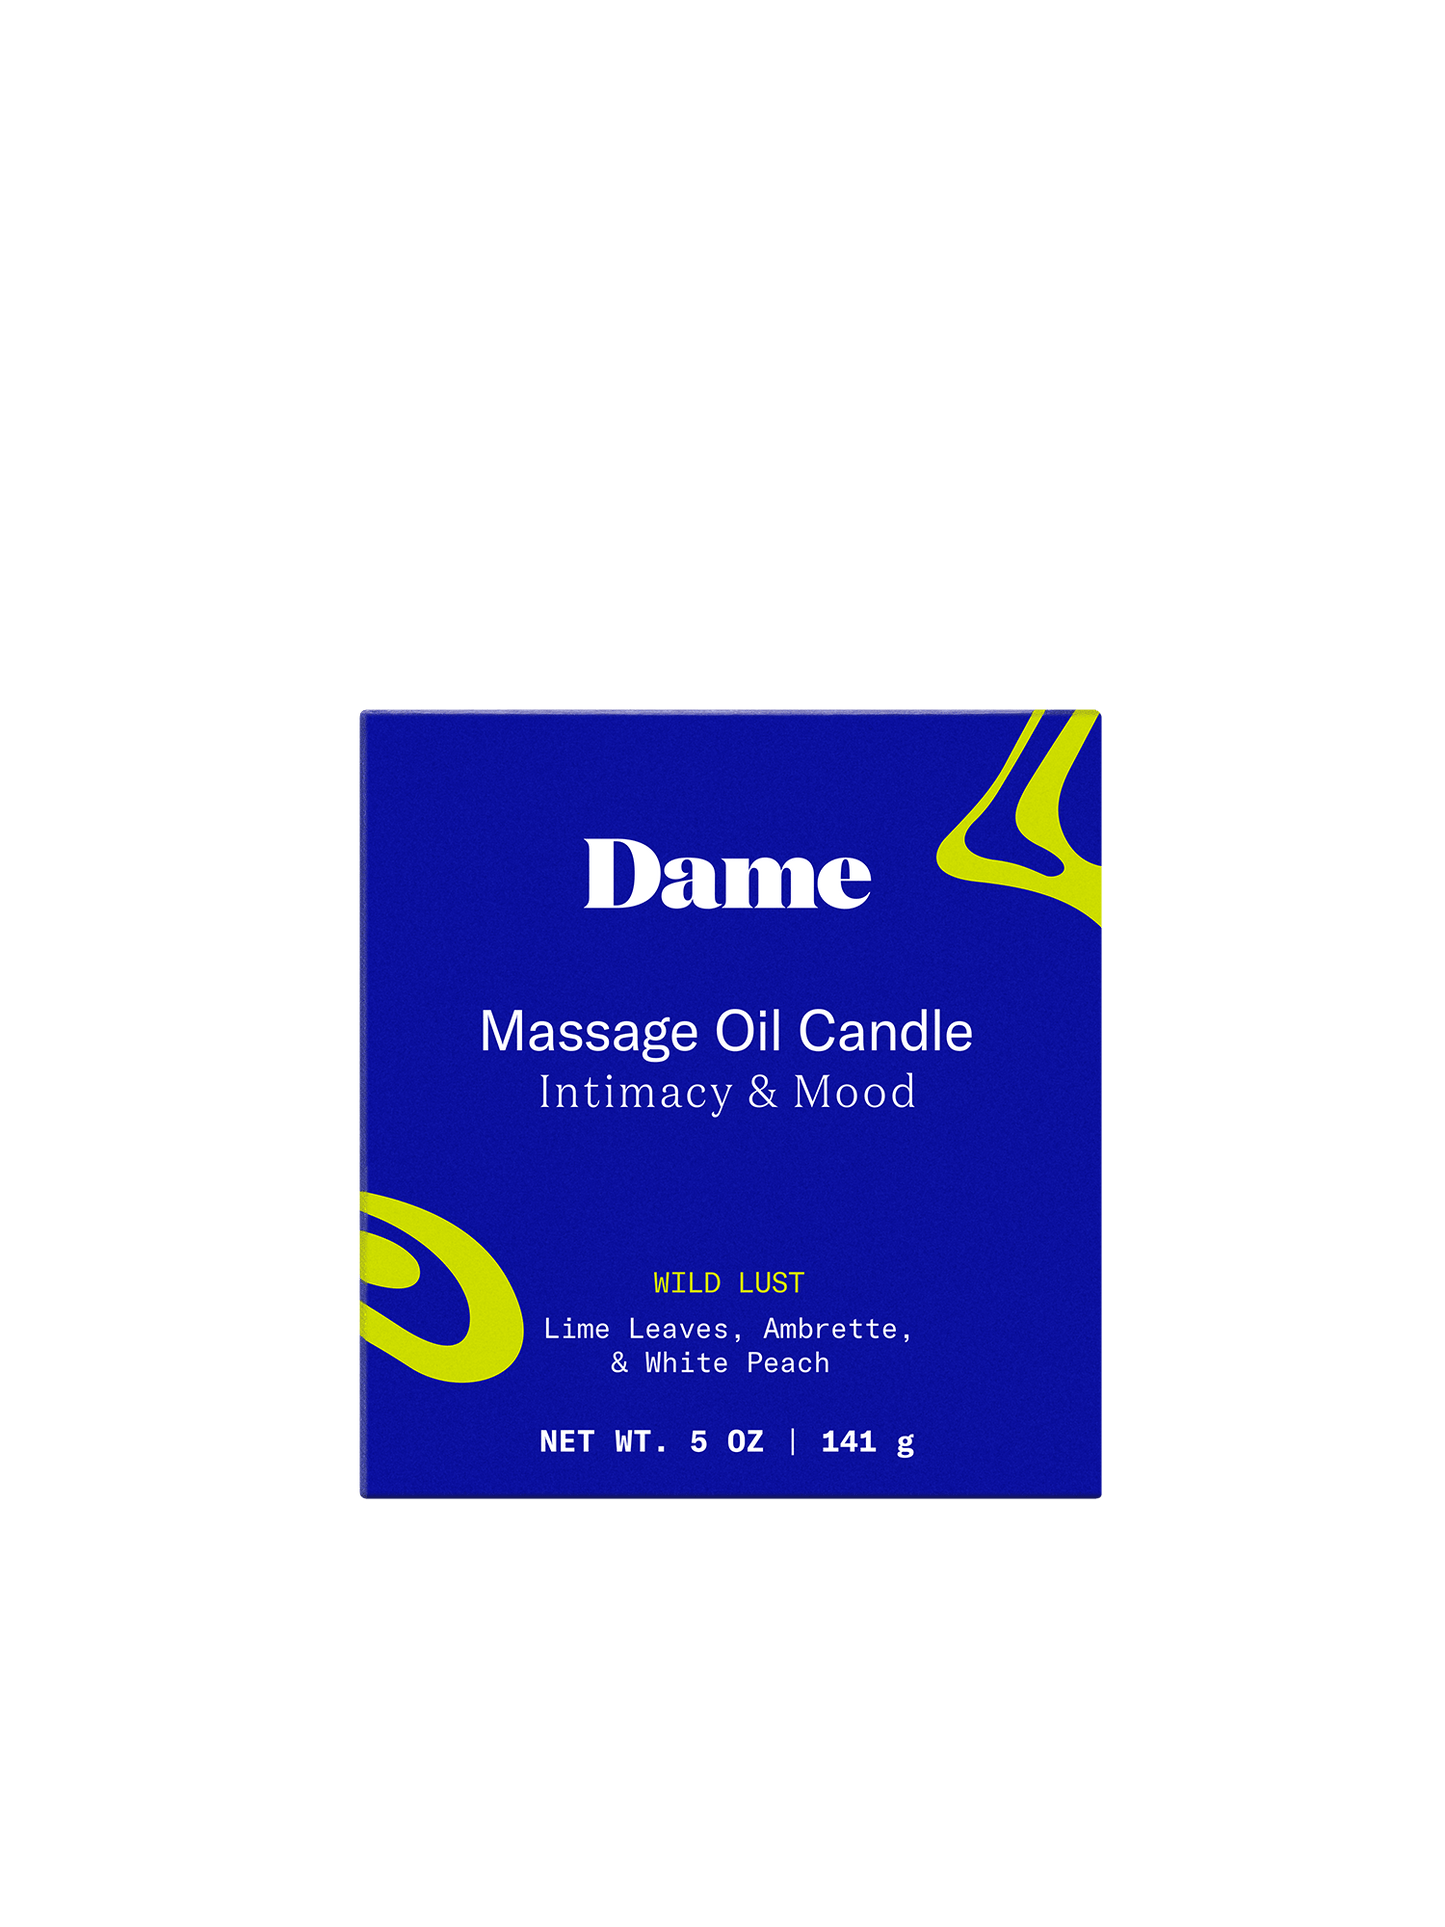 Wild Lust | Dame Massage Oil Candle Blue box packaging